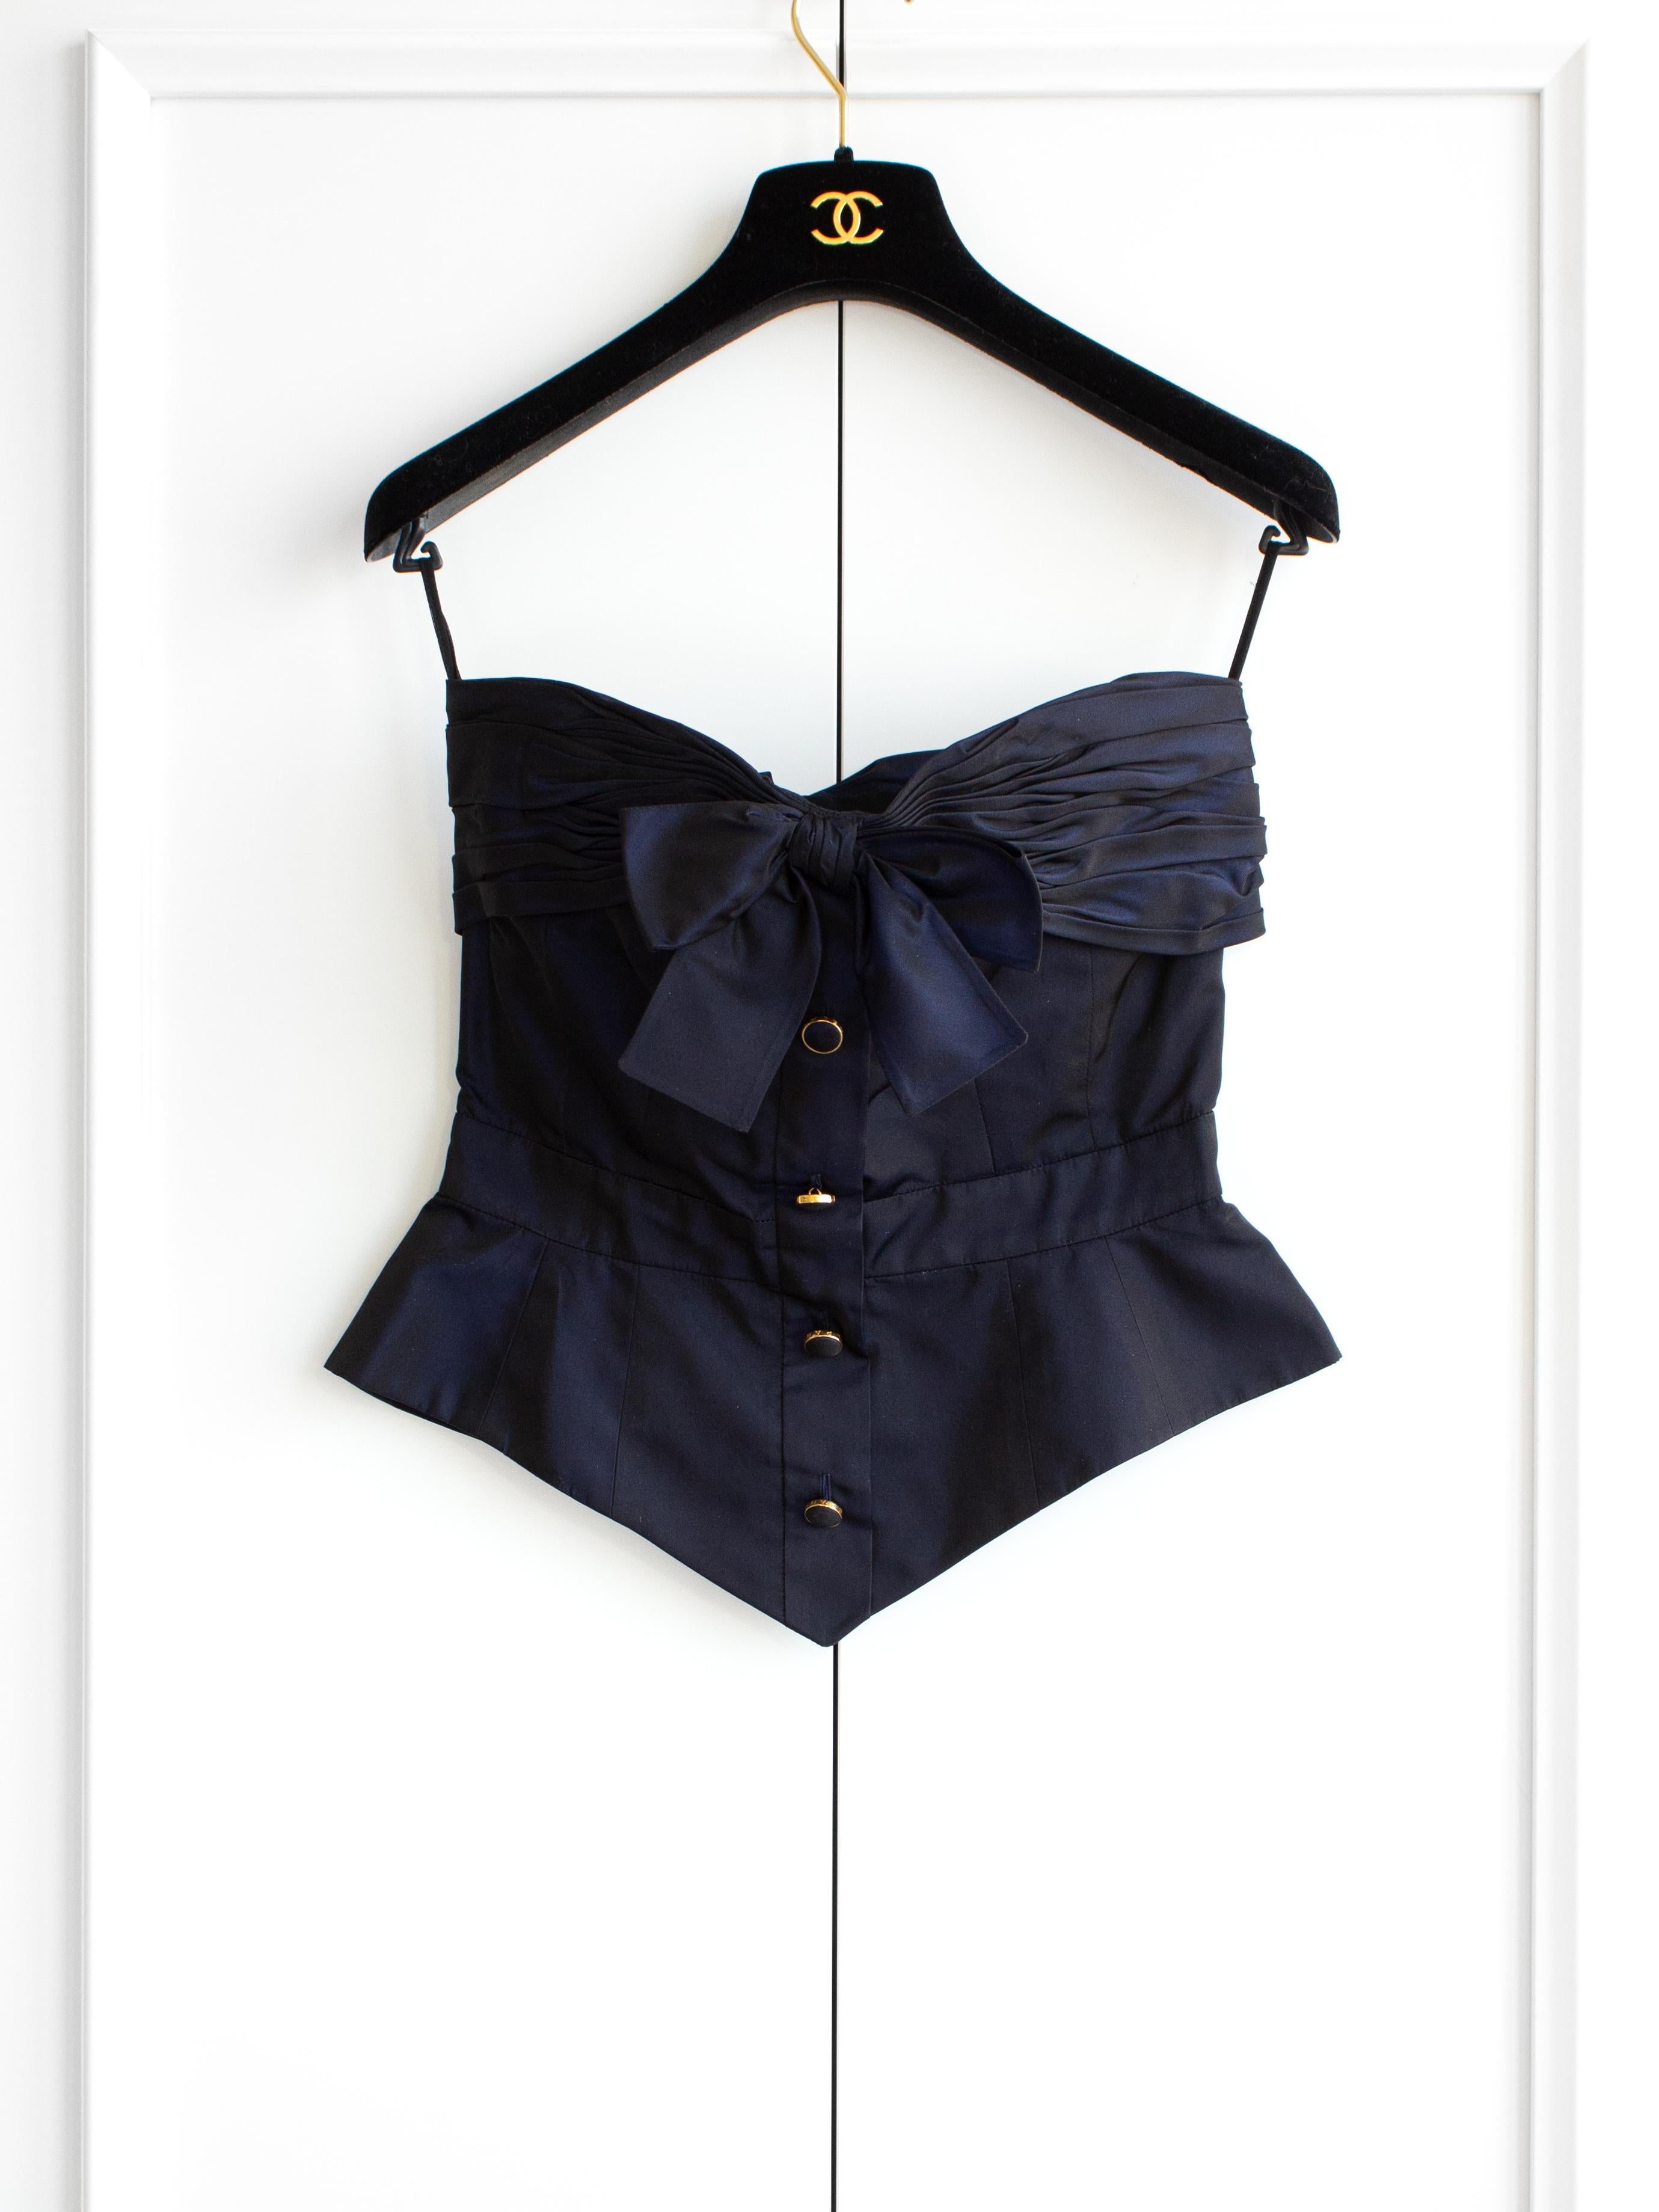 Indulge in timeless elegance with this enchanting midnight blue iridescent silk taffeta bustier top from Chanel's Fall/Winter 1991 collection. Crafted to perfection, the fitted silhouette features a captivating bow accent and four delicate buttons